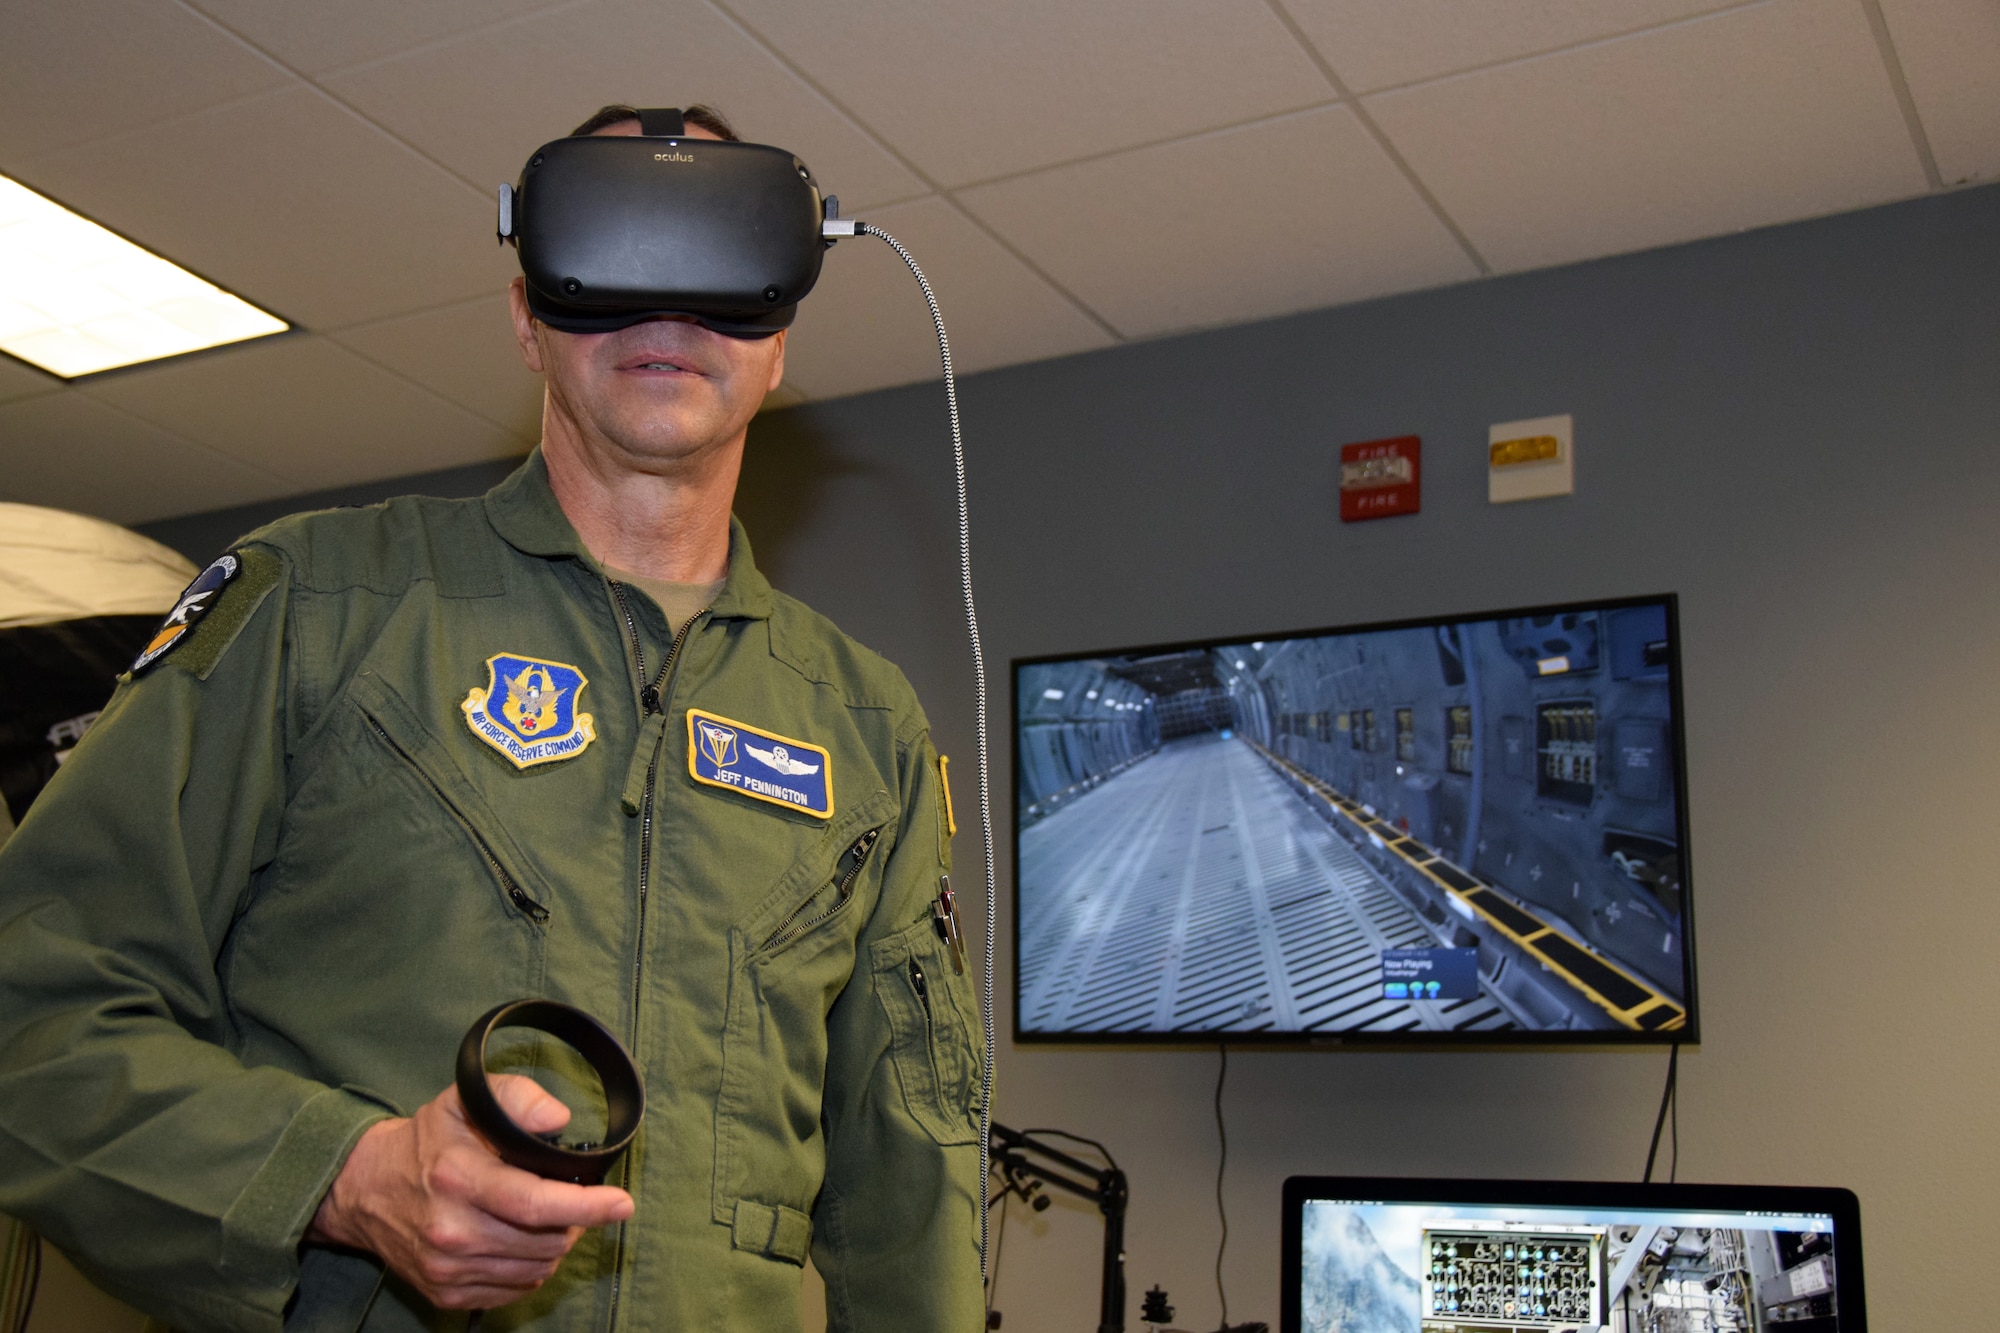 Brig. Gen. Jeffrey T. Pennington, 4th Air Force commander, experiences the virtual reality training system at the 733rd Training Squadron during a tour of the wing Sept. 23, 2020 at Joint Base San Antonio-Lackland, Texas.